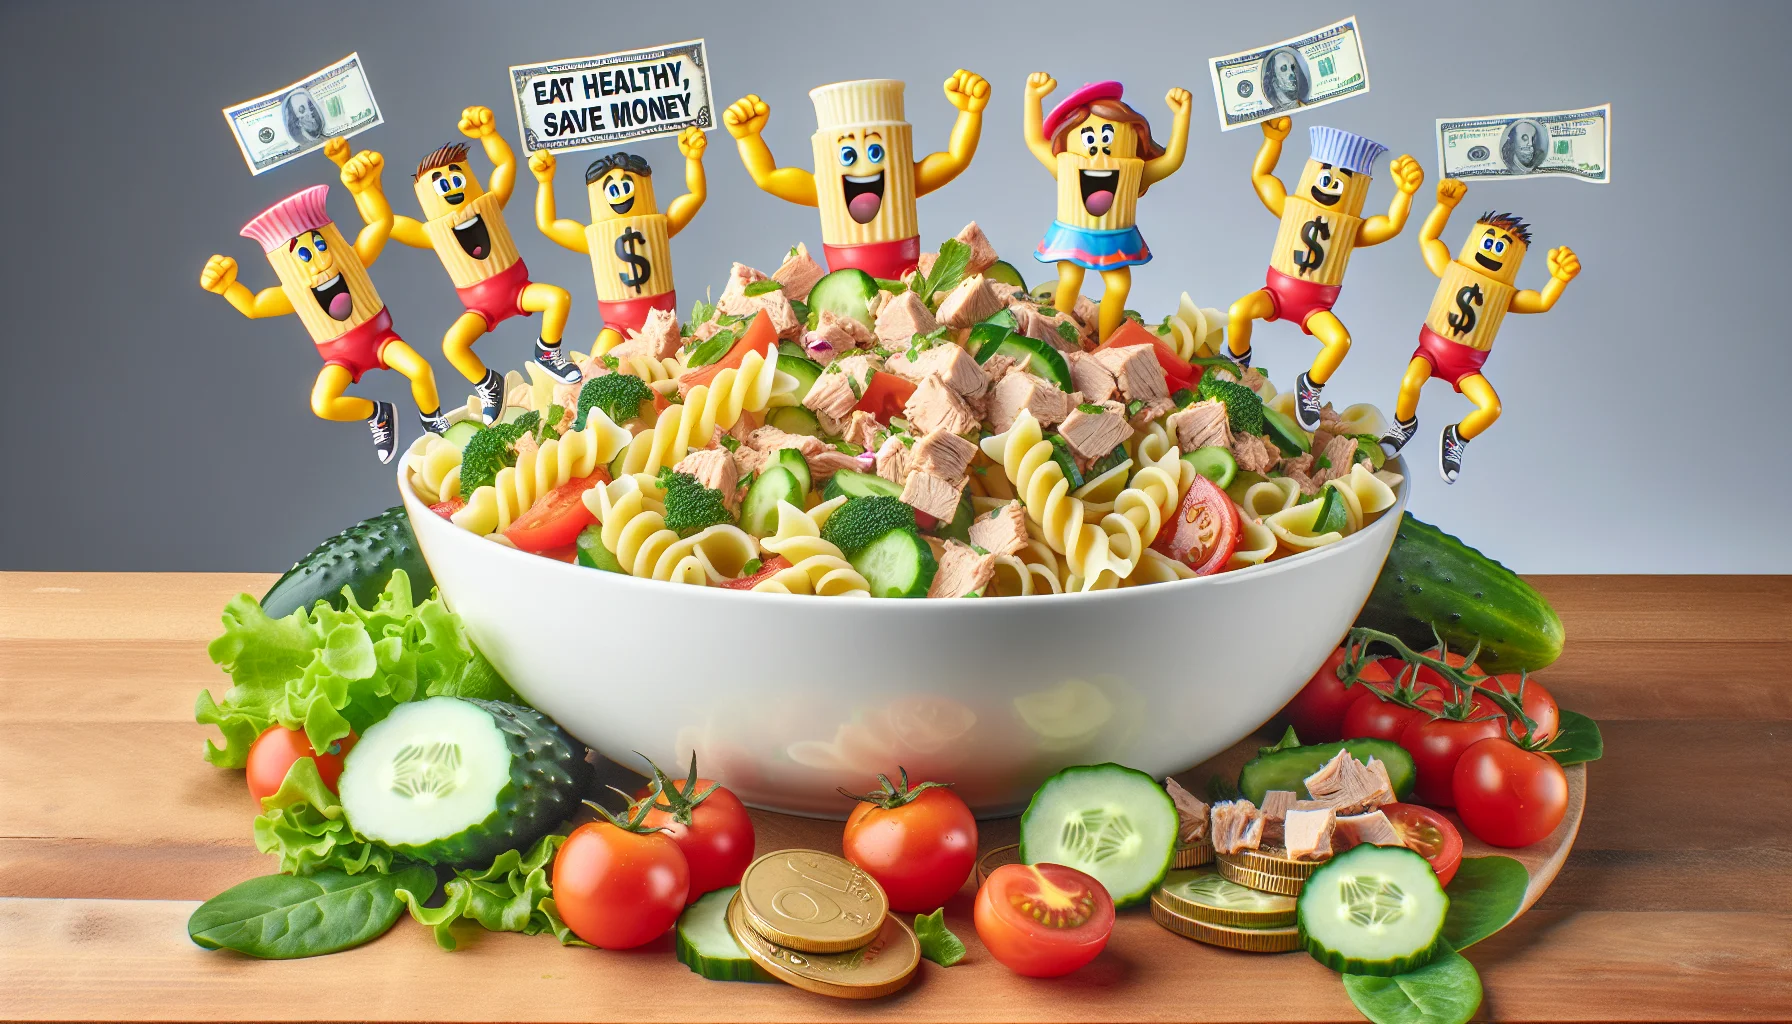 Display a humorous scene with a bowl of Tuna Pasta Salad, embodying the spirit of springtime. The vibrant salad consists of juicy chunks of tuna, twirls of pasta, and a colorful selection of fresh vegetables such as cherry tomatoes, cucumbers, and bell peppers, tossed in a tangy lemon vinaigrette. A group of animated, comical dollar bills and coins are acting as cheerleaders on the sidelines, waving banners that read 'Eat Healthy, Save Money', enthusiastically encouraging people to opt for this budget-friendly, healthy living choice.